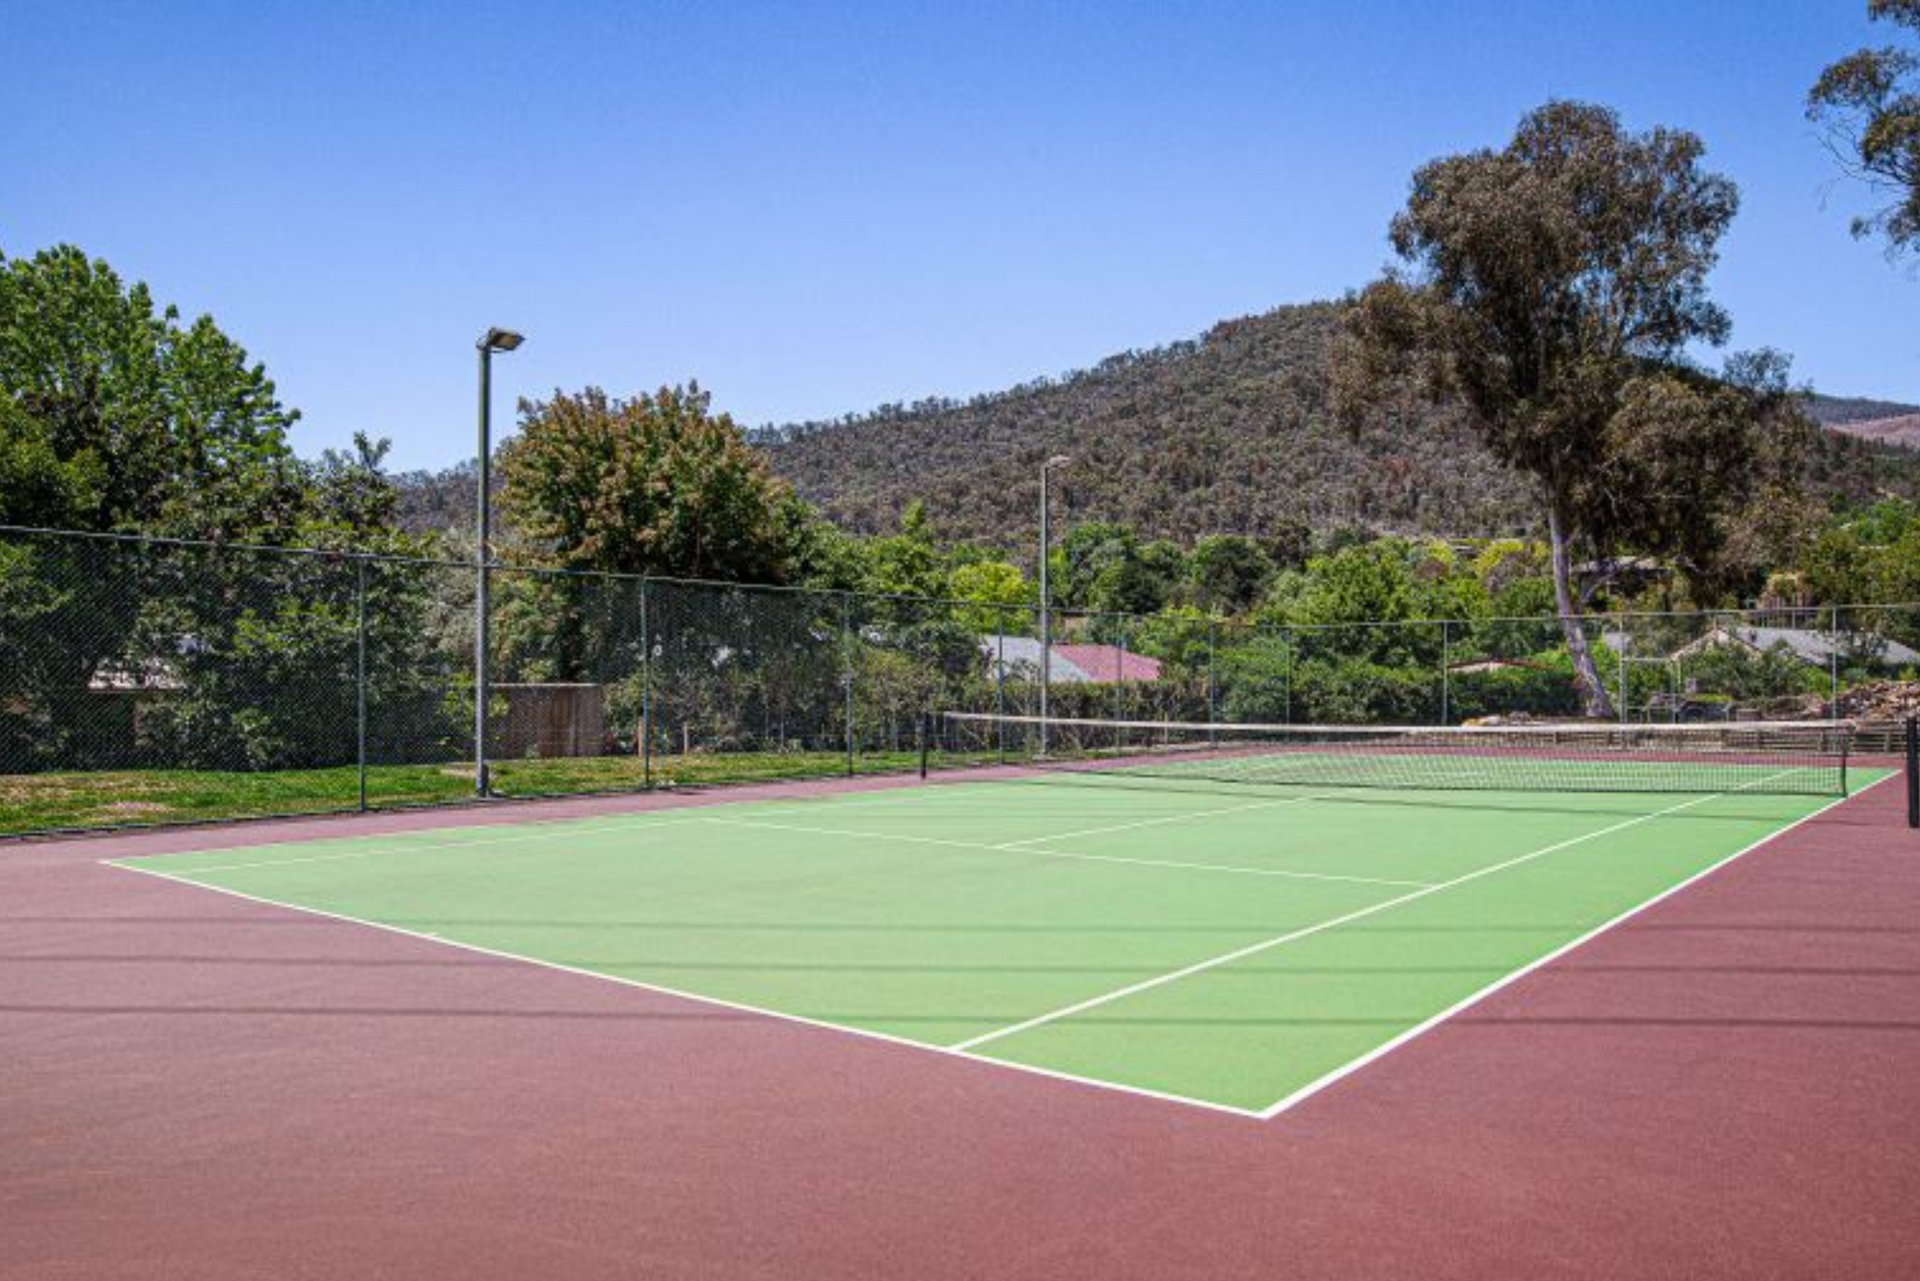 A tennis court with a fence and trees in the background